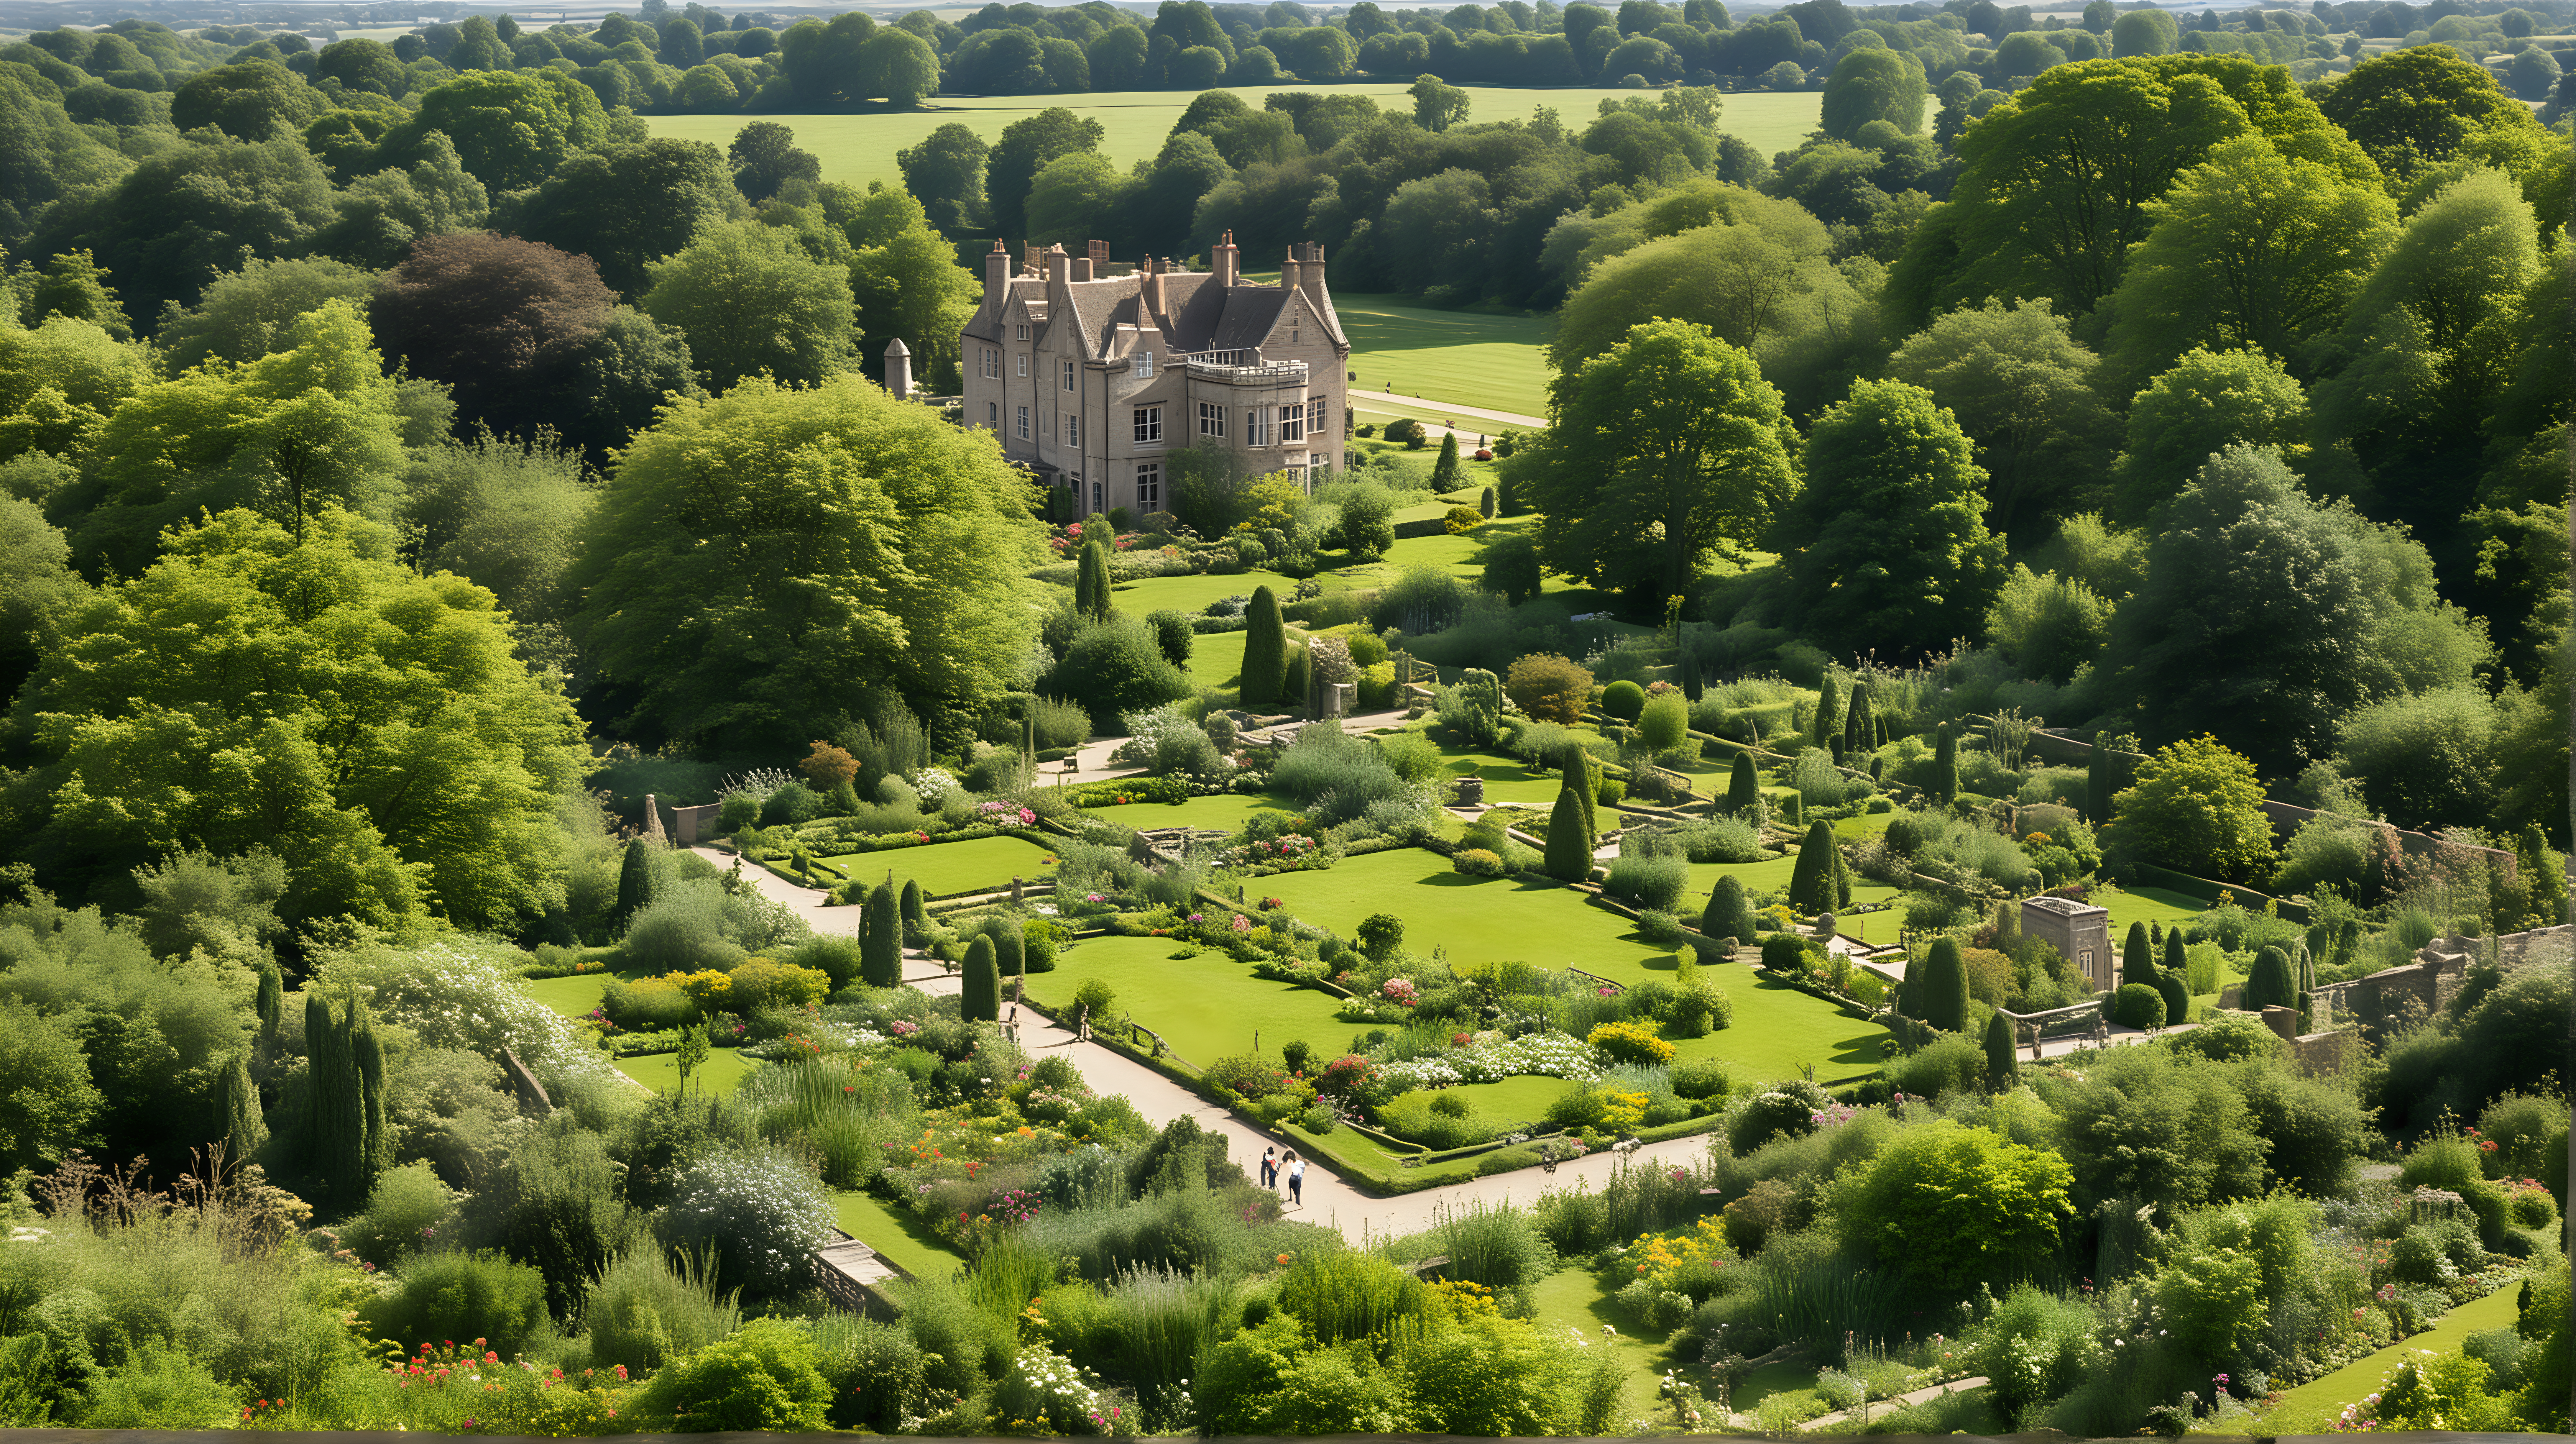 Scenic English Gardens Surrounding an Old Manor House Under Sunny Skies